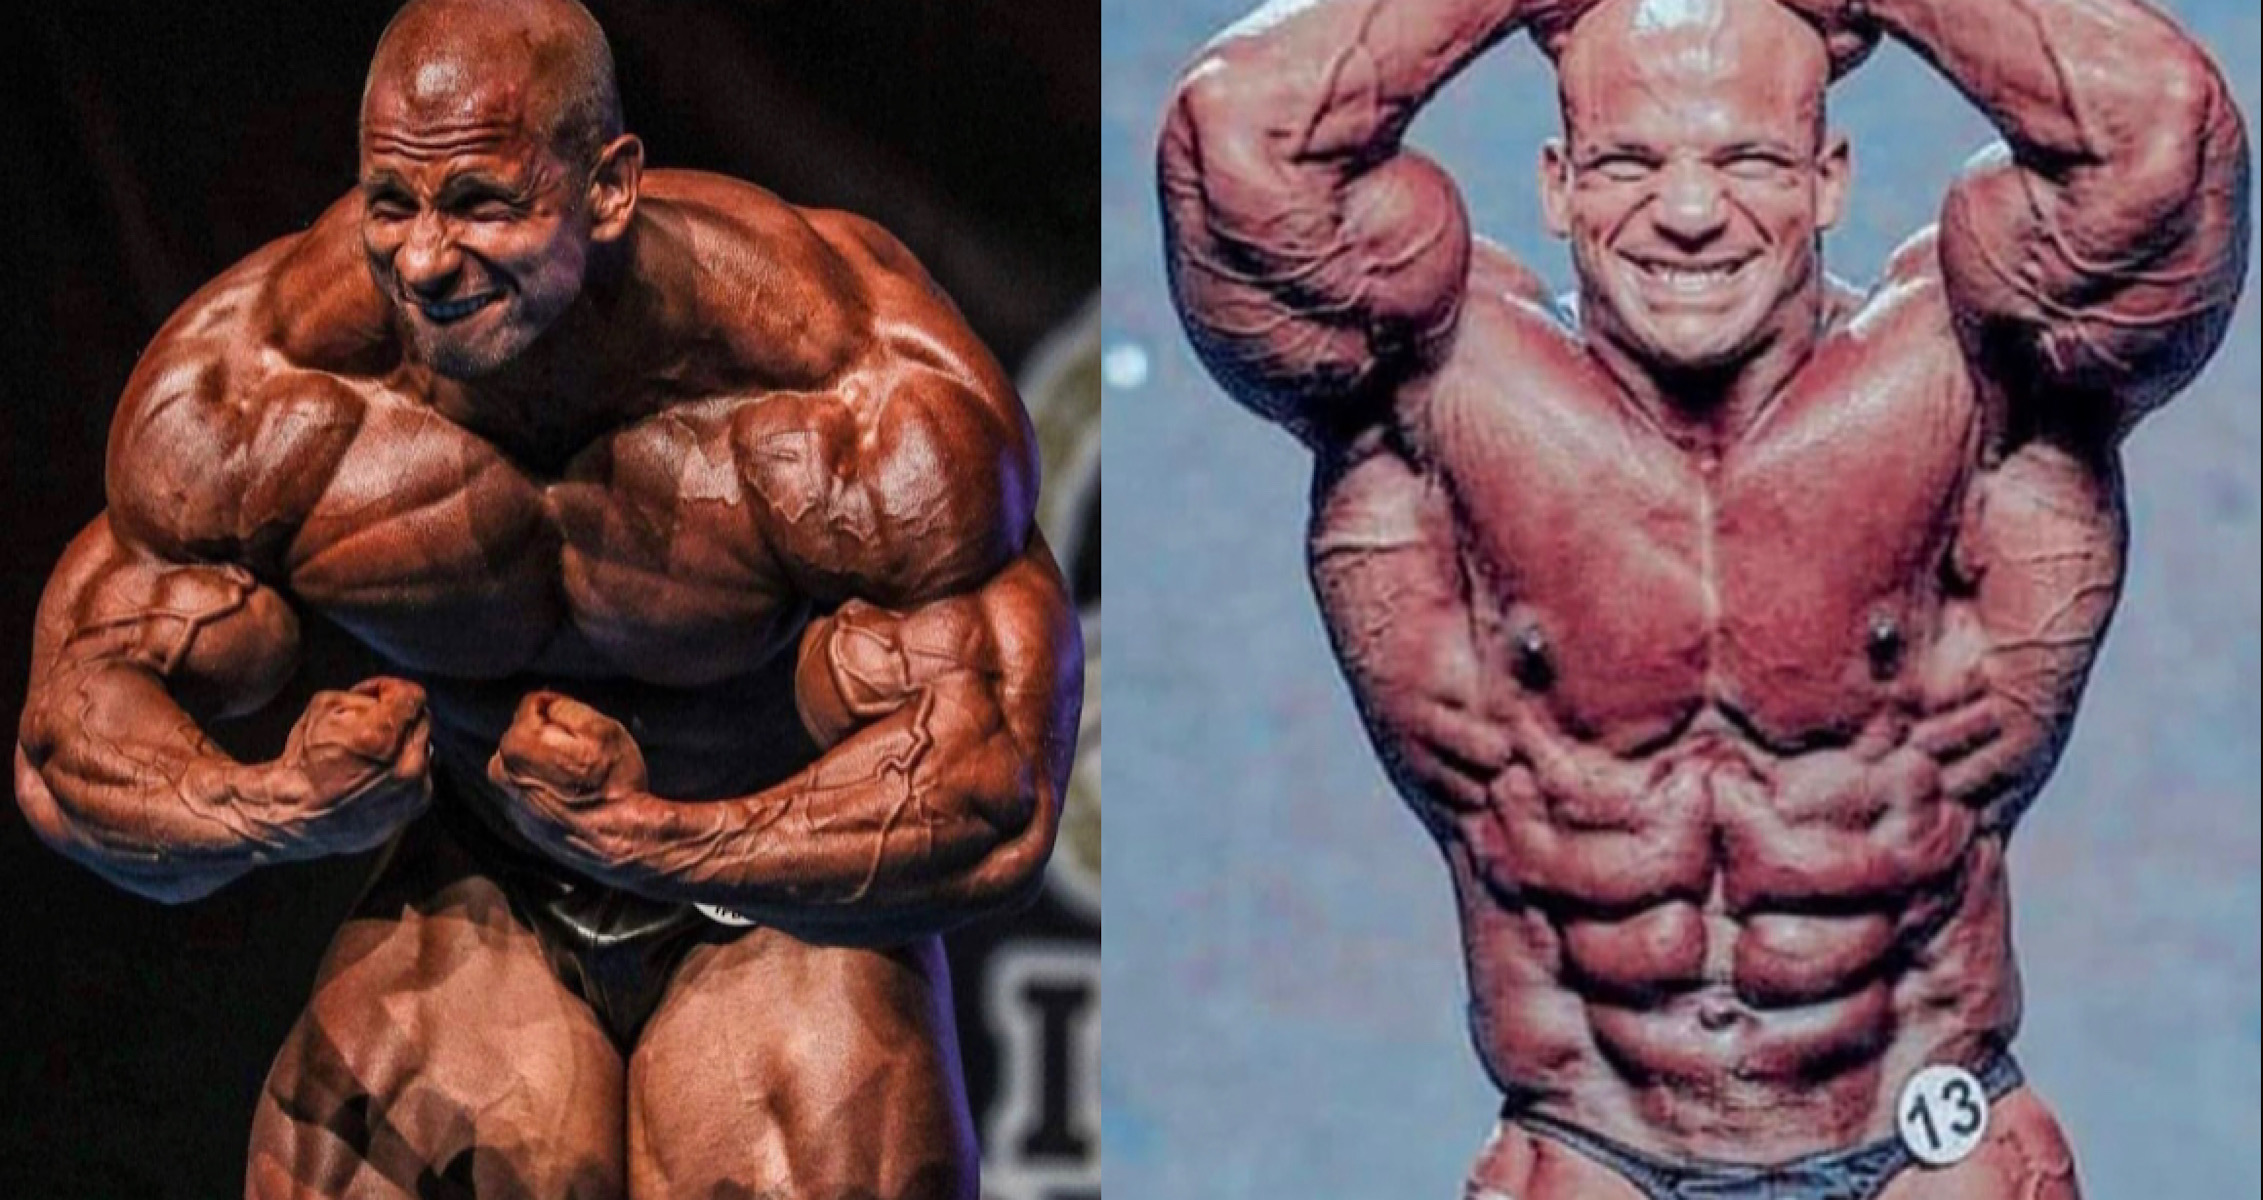 Can Top IFBB Elite Pro Athlete Michal Krizo Succeed in IFBB Pro League?